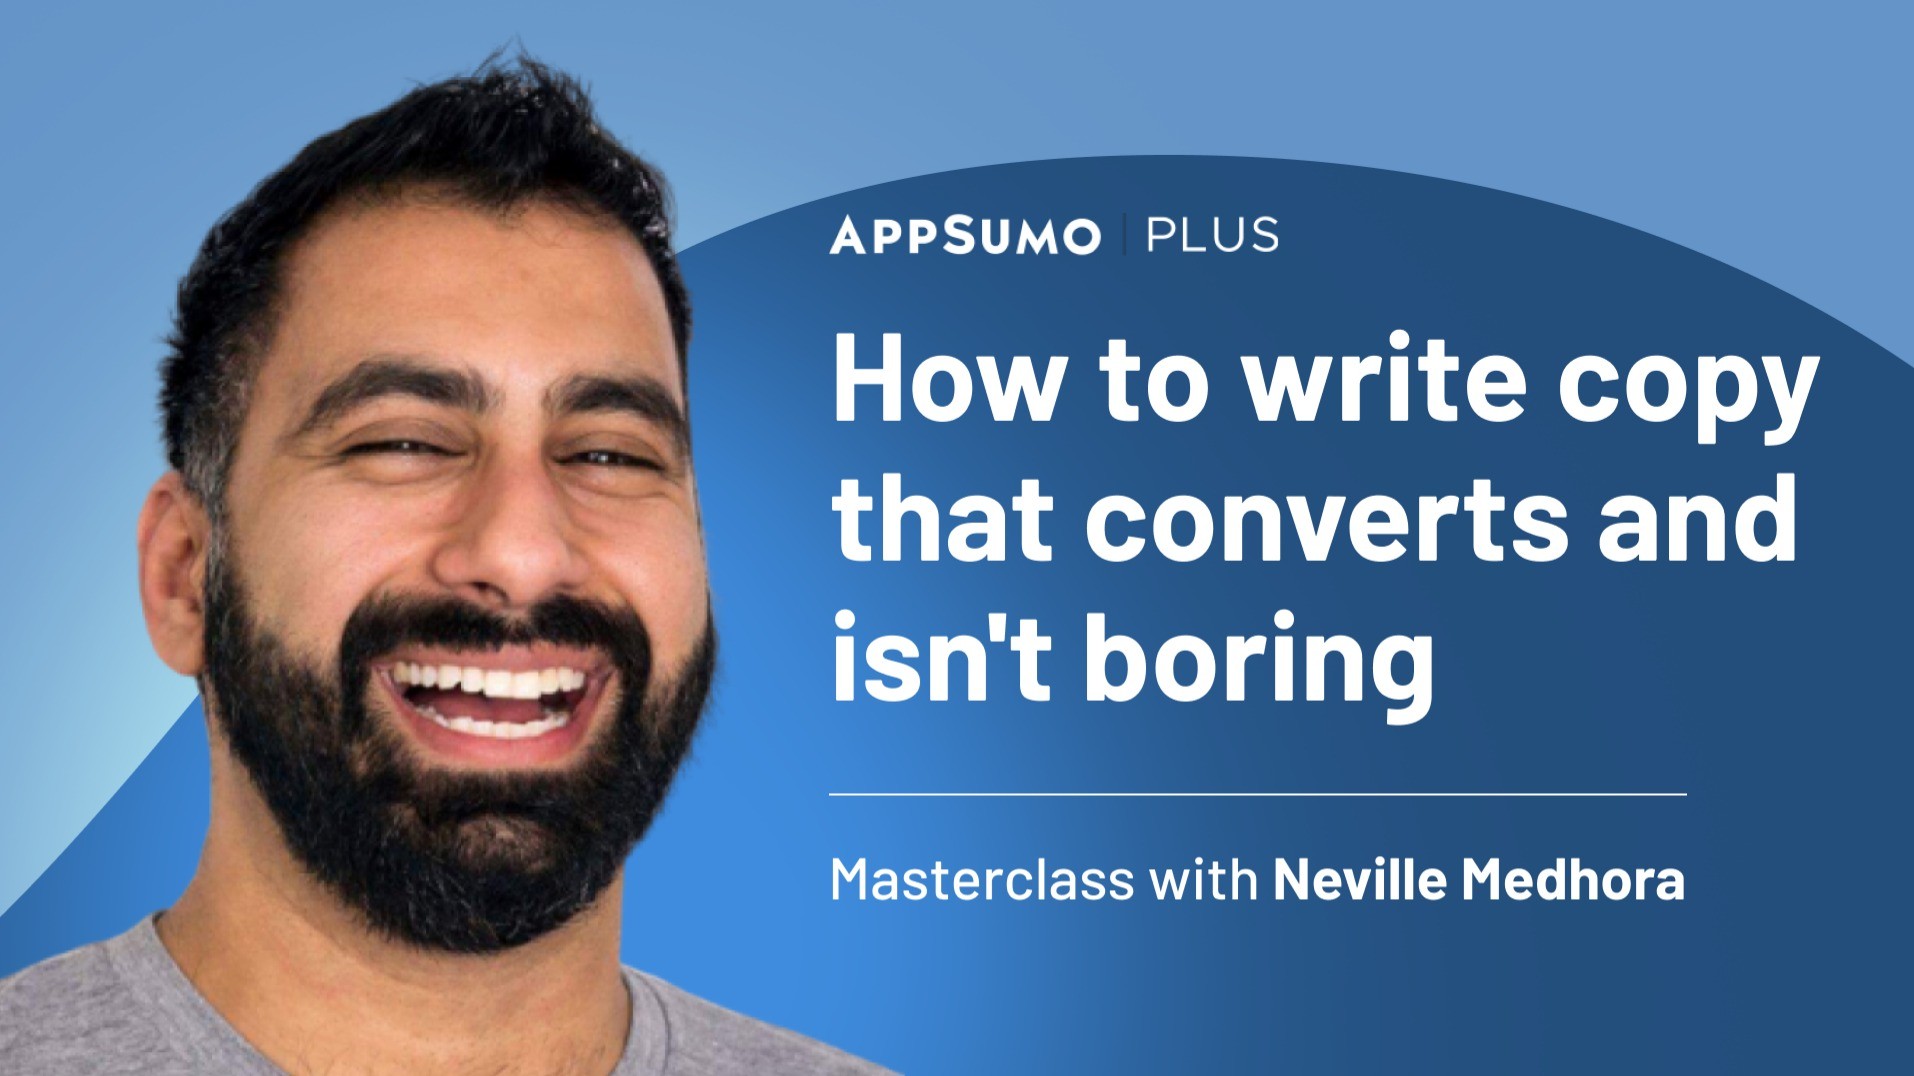 AppSumo Deal for Masterclass: Write copy that converts and isn't boring – Plus exclusive